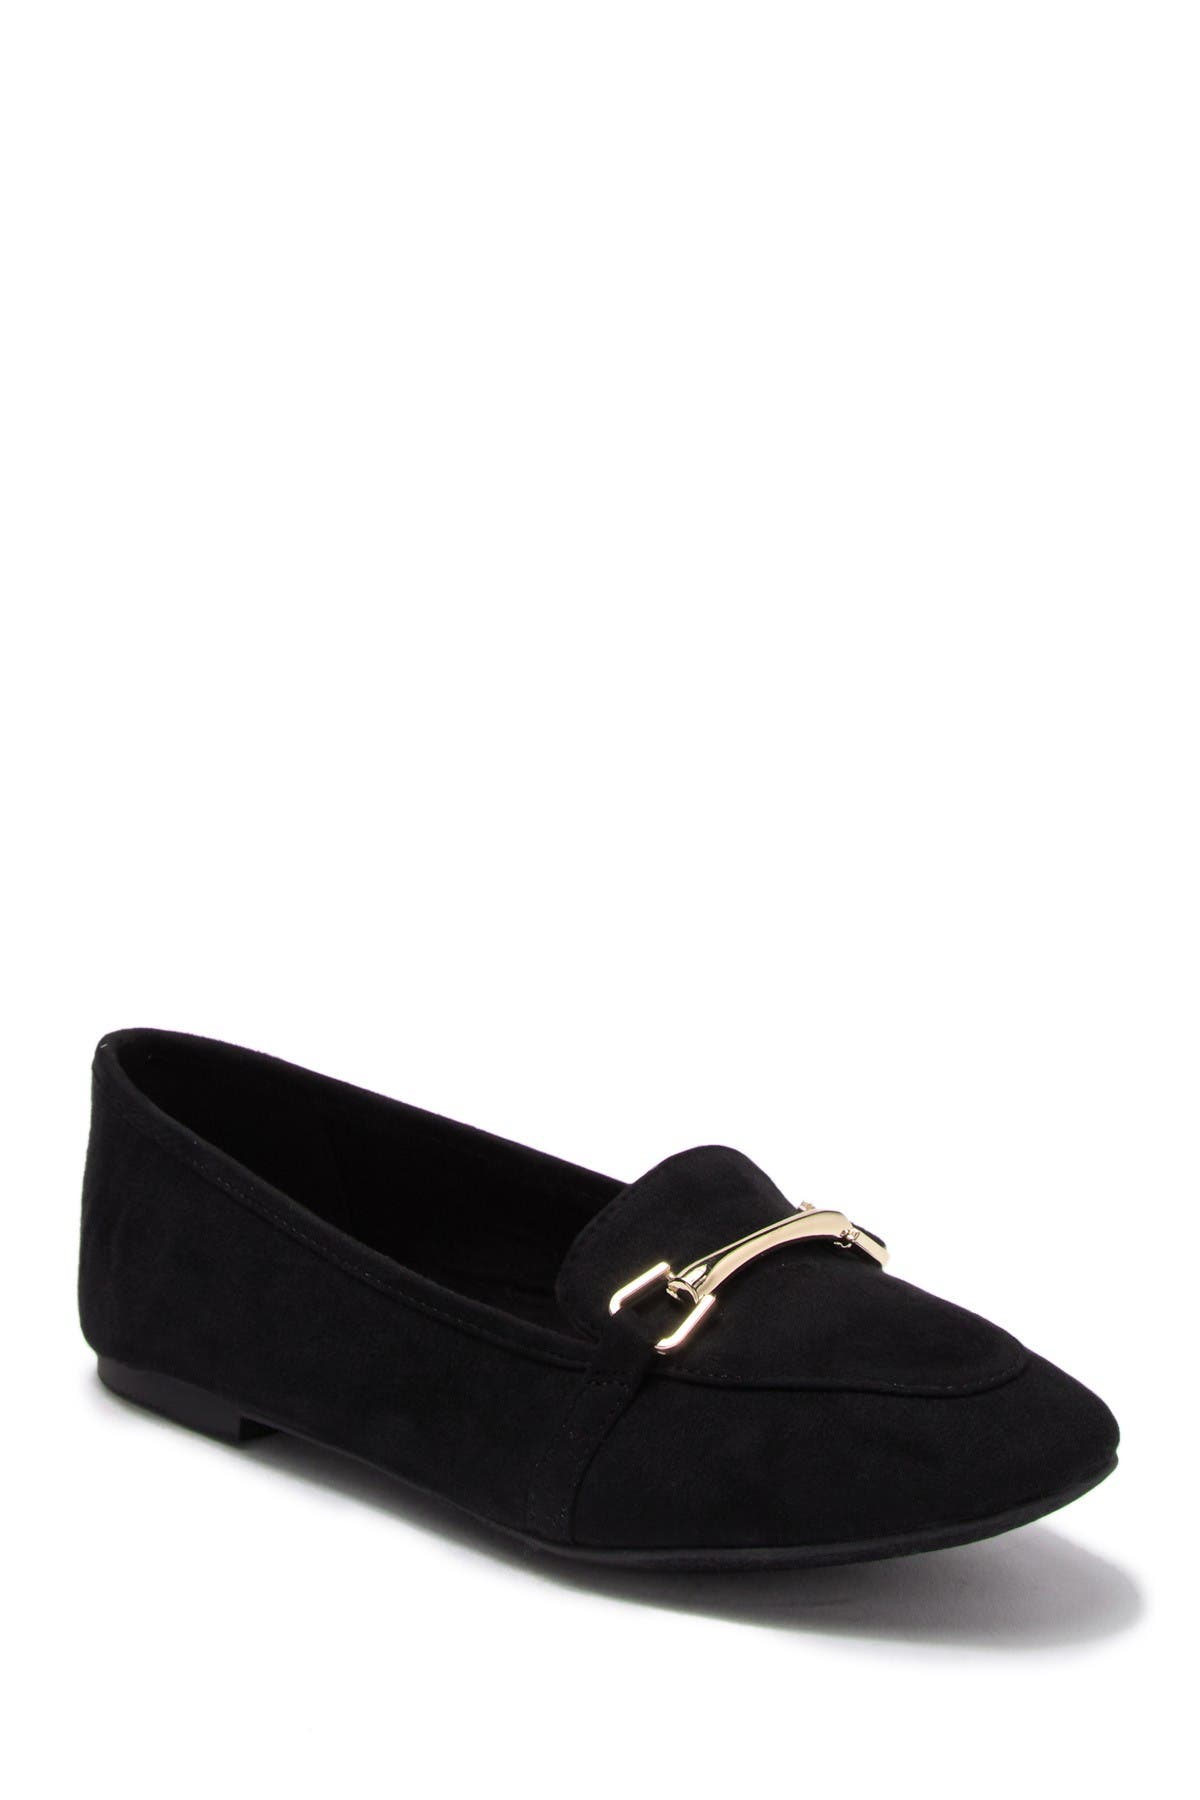 call it spring women's loafers